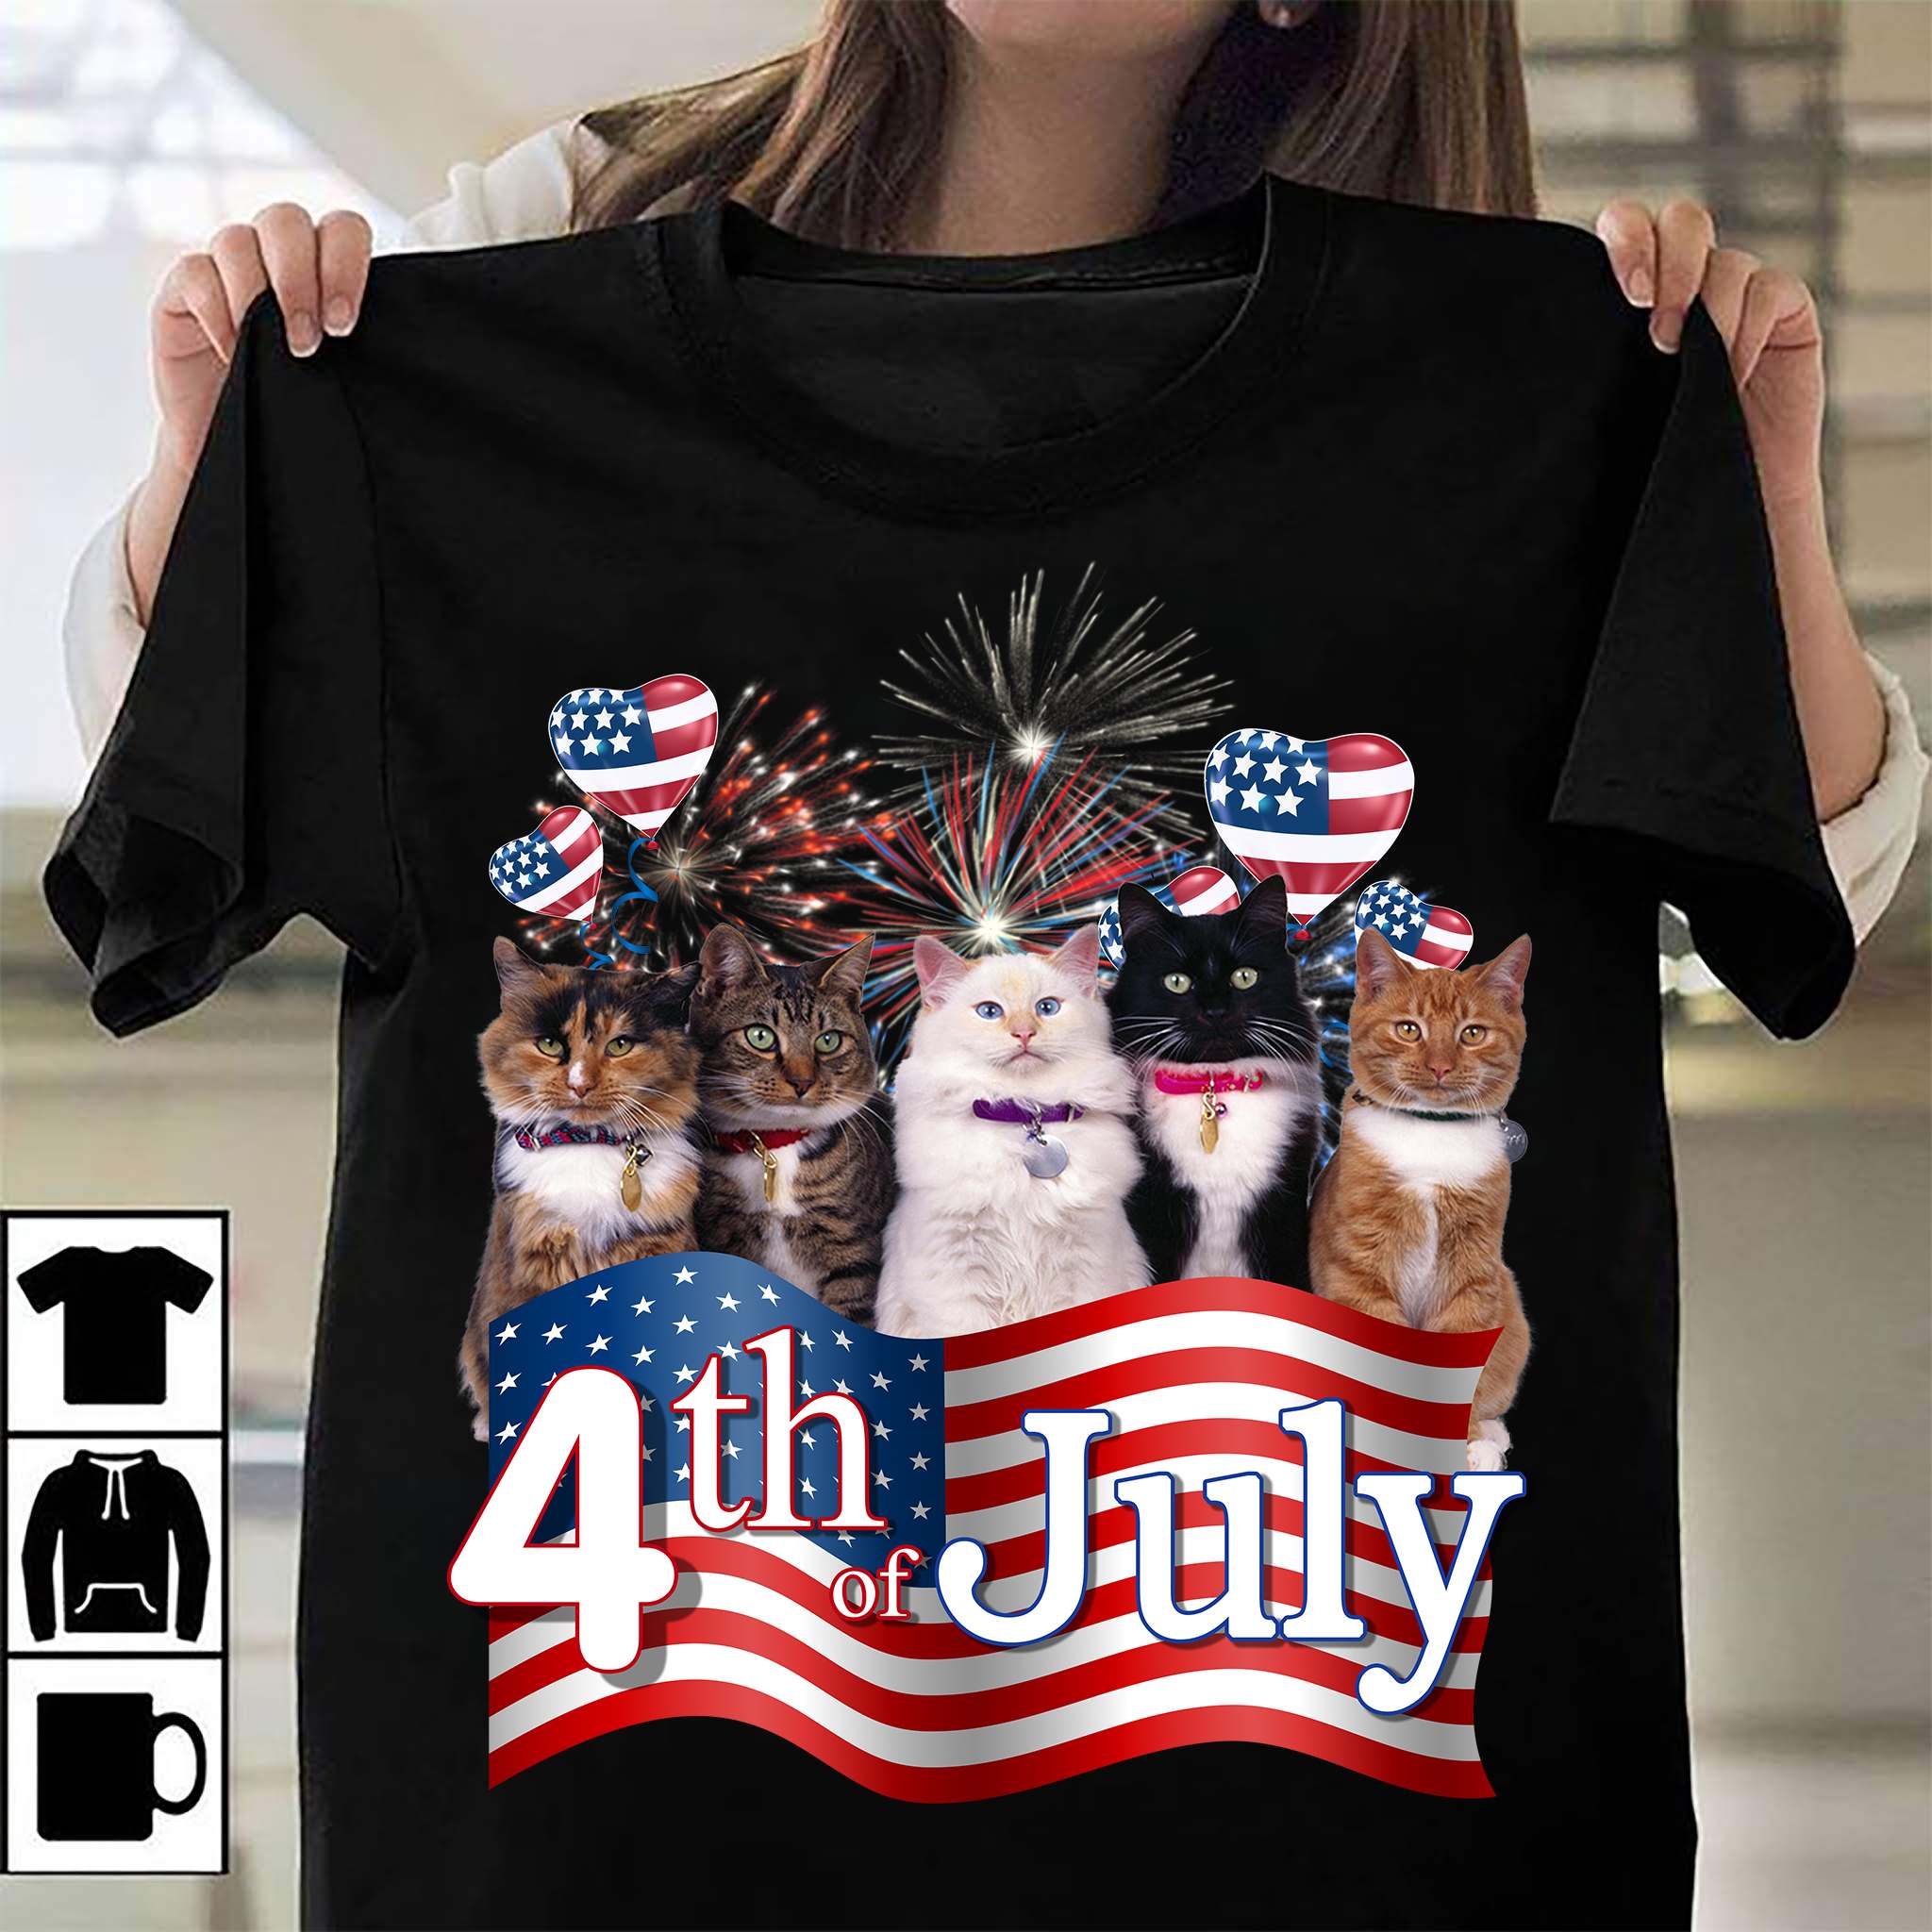 4th of July, cat lover - America independence day